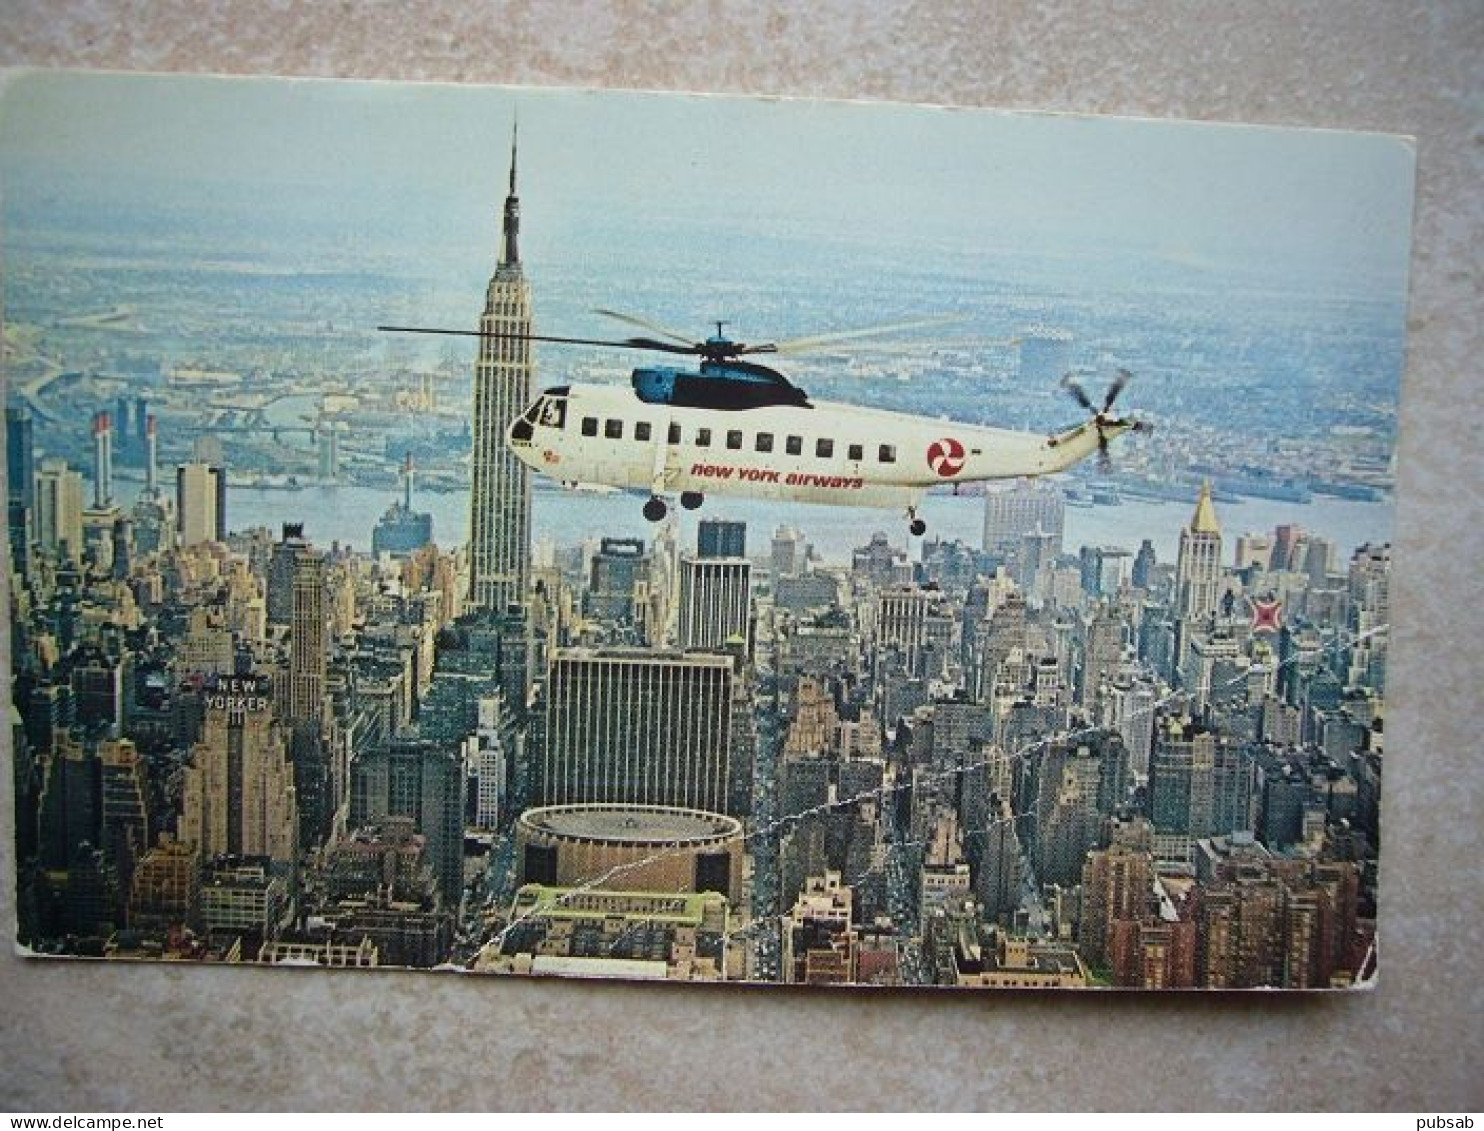 Avion / Airplane / NEW YORK AIRWAYS / Helicopter / Sikorsky S-61L - Elicotteri